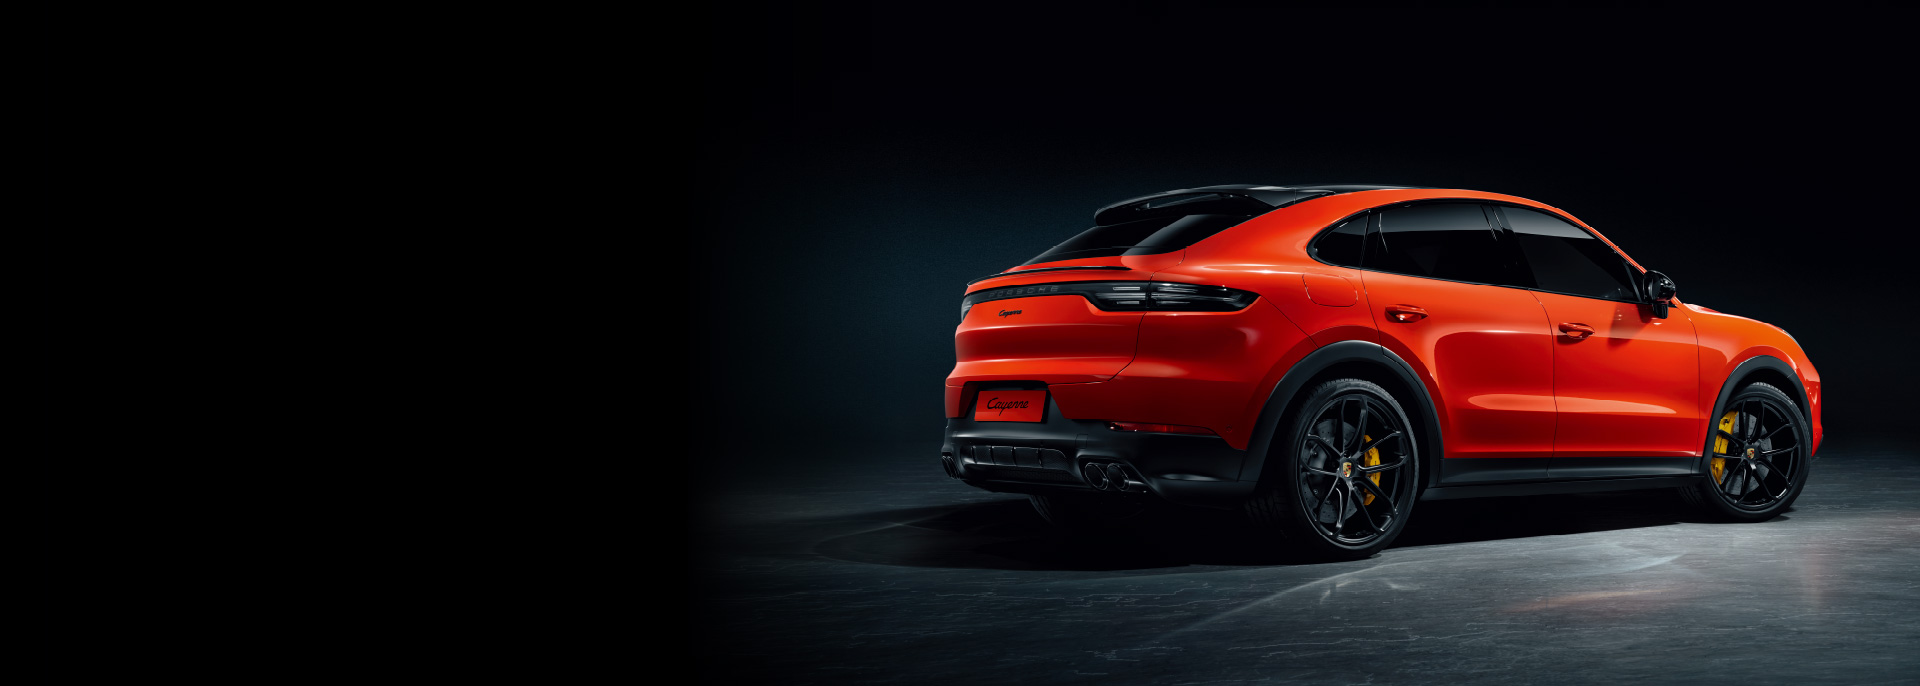 The new Cayenne Coupé Debut